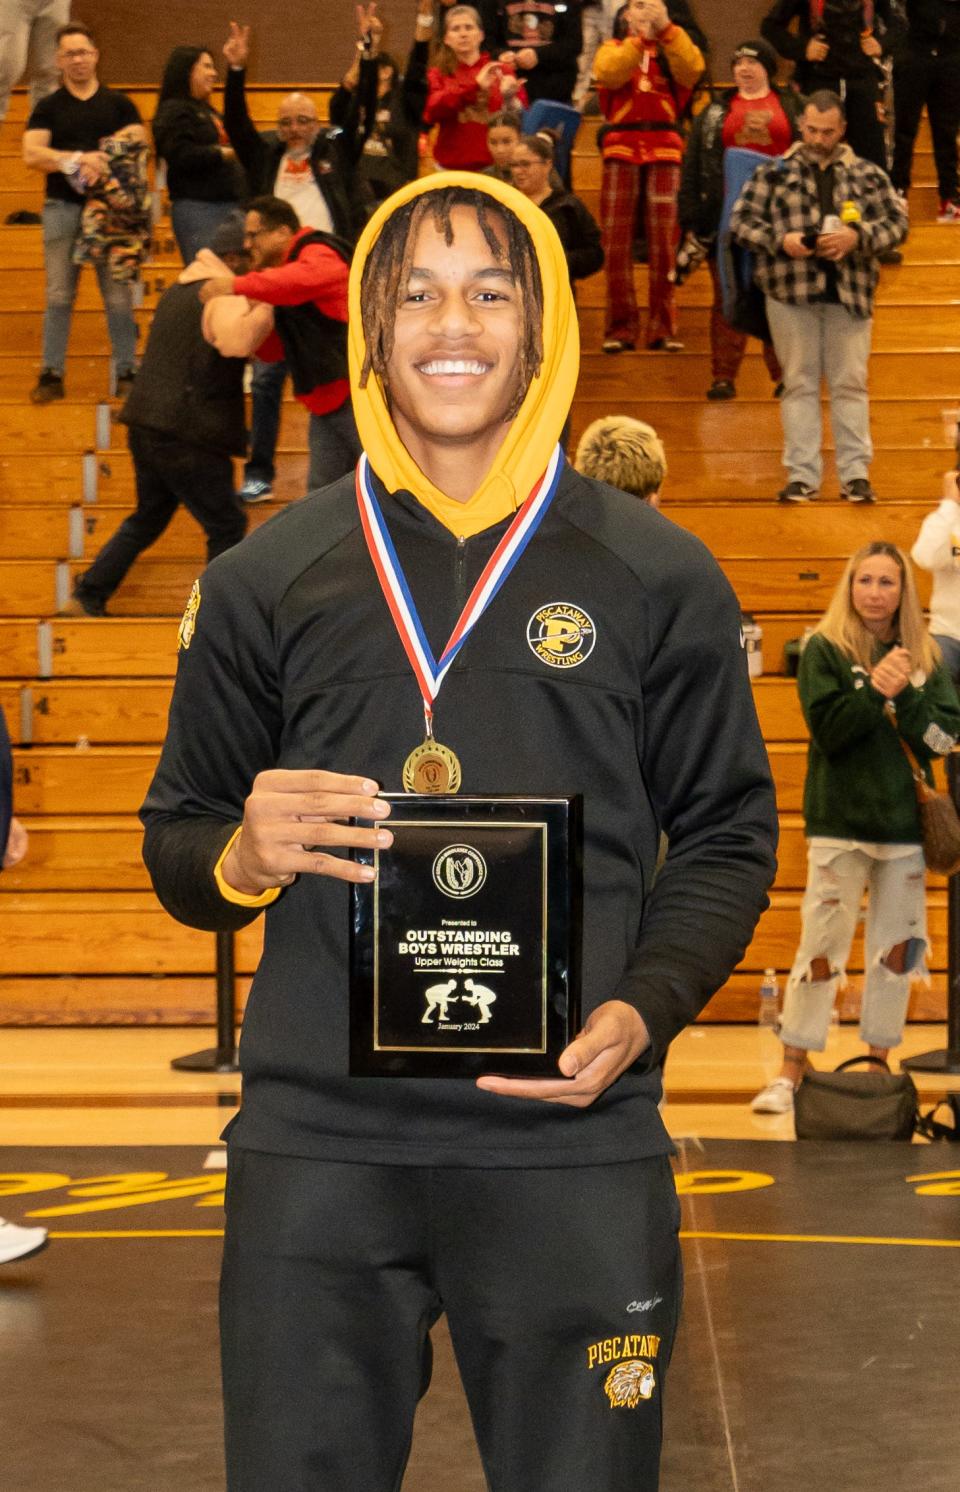 Piscataway's Sean Love holding the Upper Weights Outstanding Wrestler award at the 2014 GMC wrestling tournament.